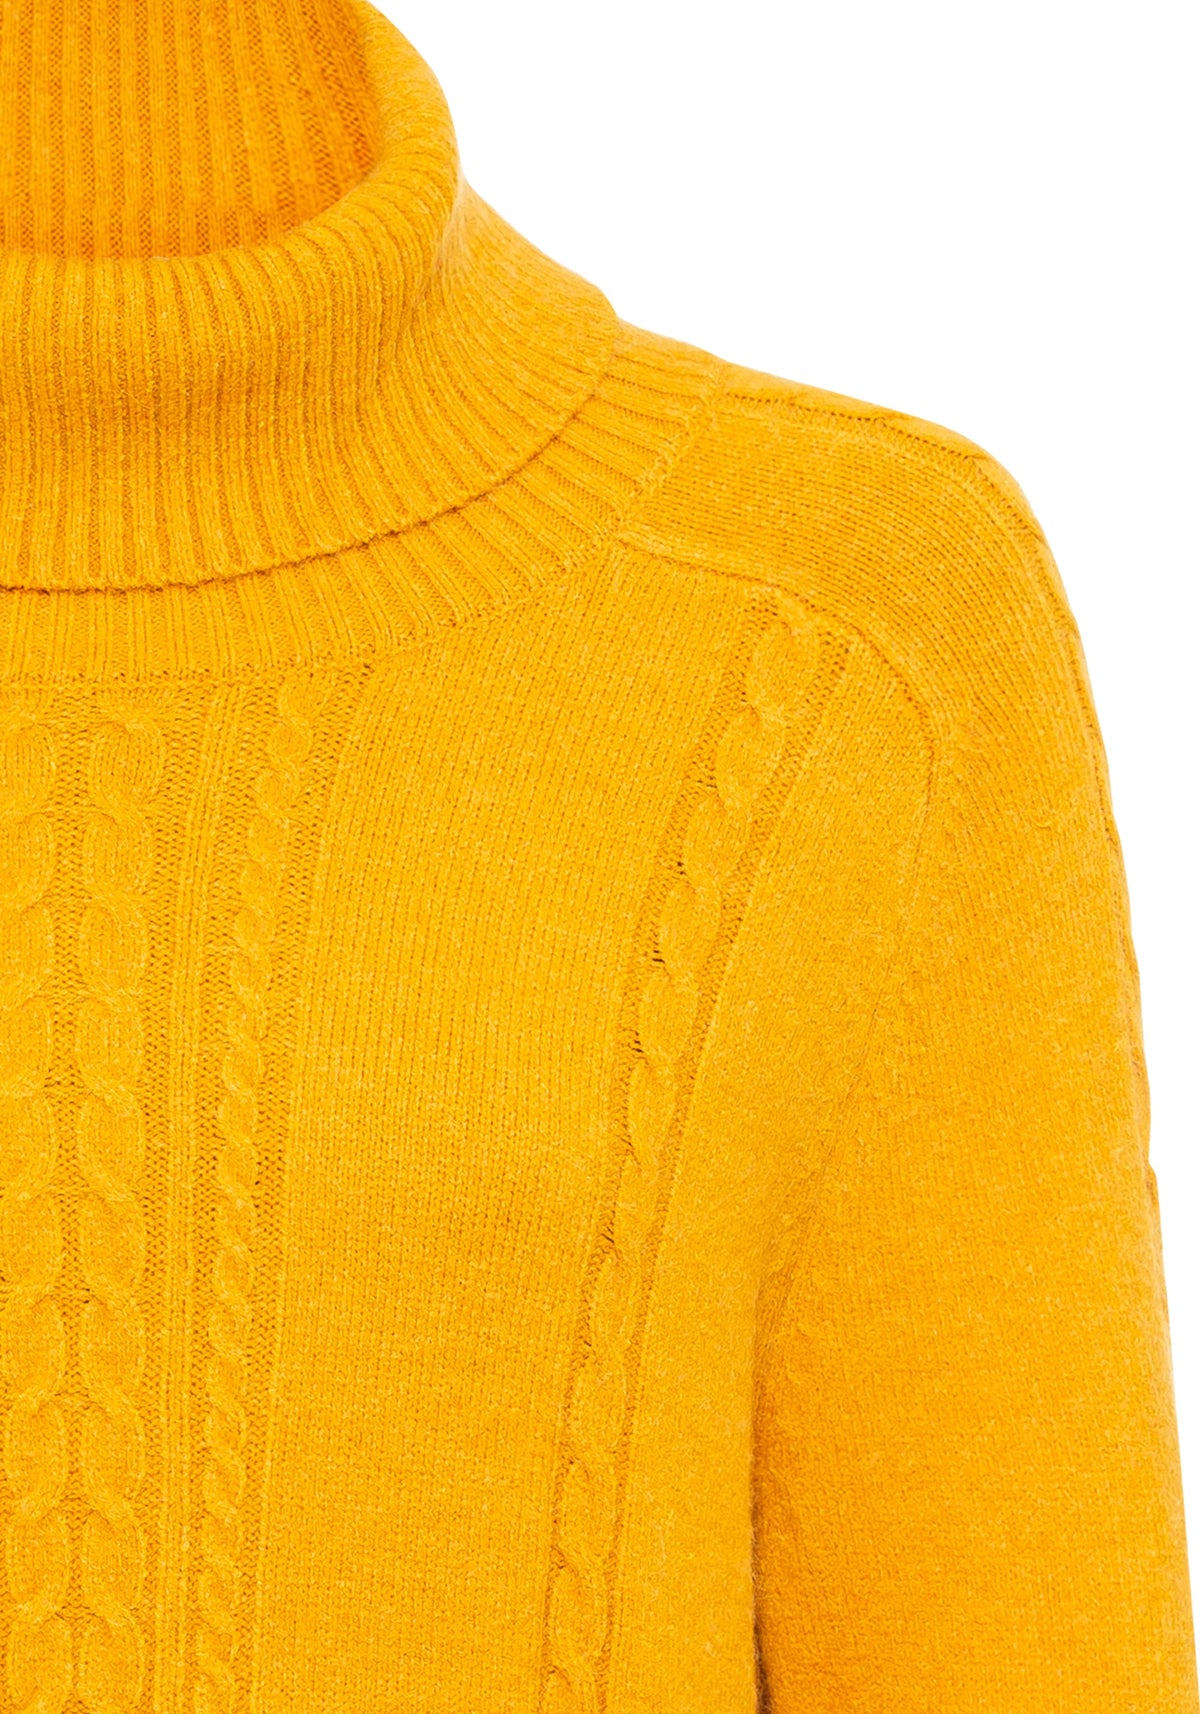 Long Sleeve Cable Knit Turtleneck